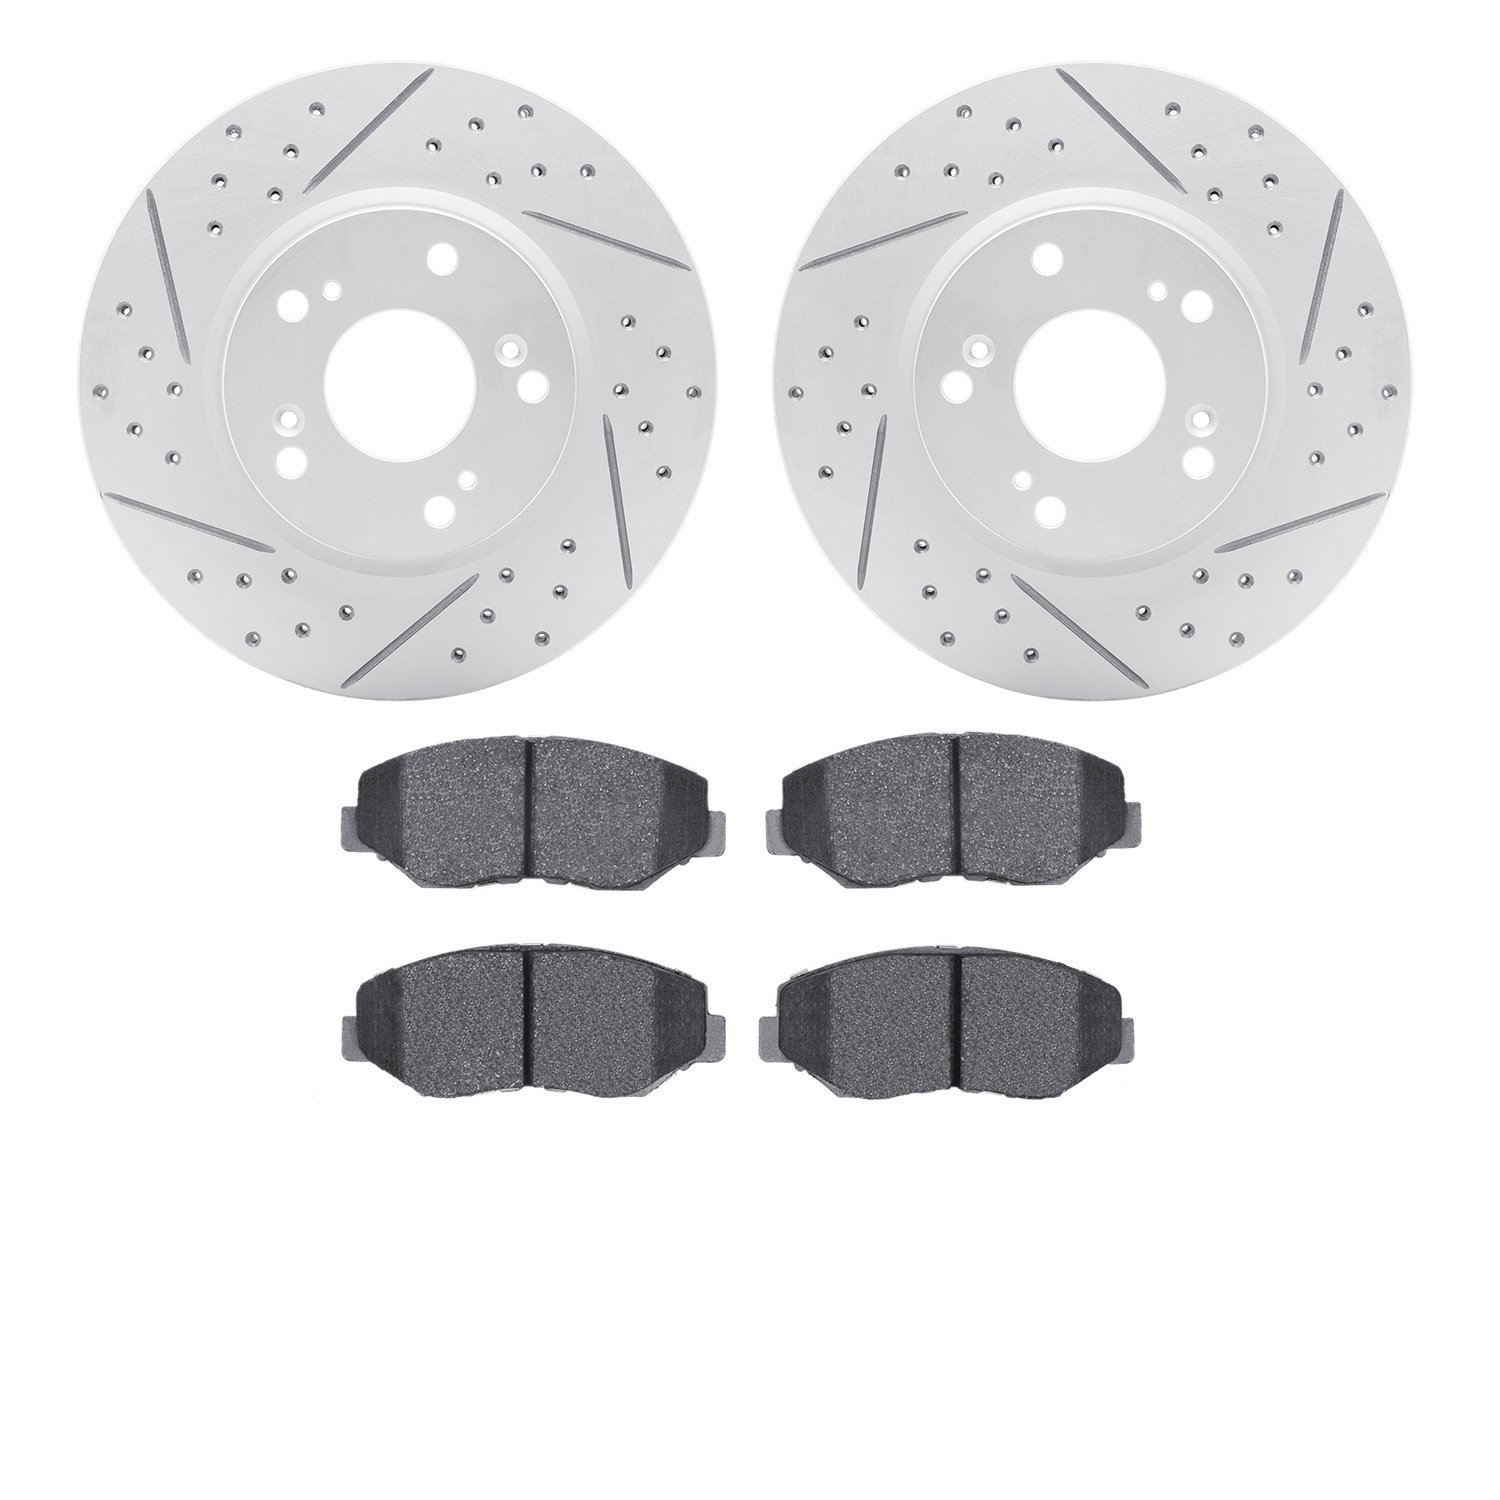 2502-59035 Geoperformance Drilled/Slotted Rotors w/5000 Advanced Brake Pads Kit, 2003-2017 Acura/Honda, Position: Front